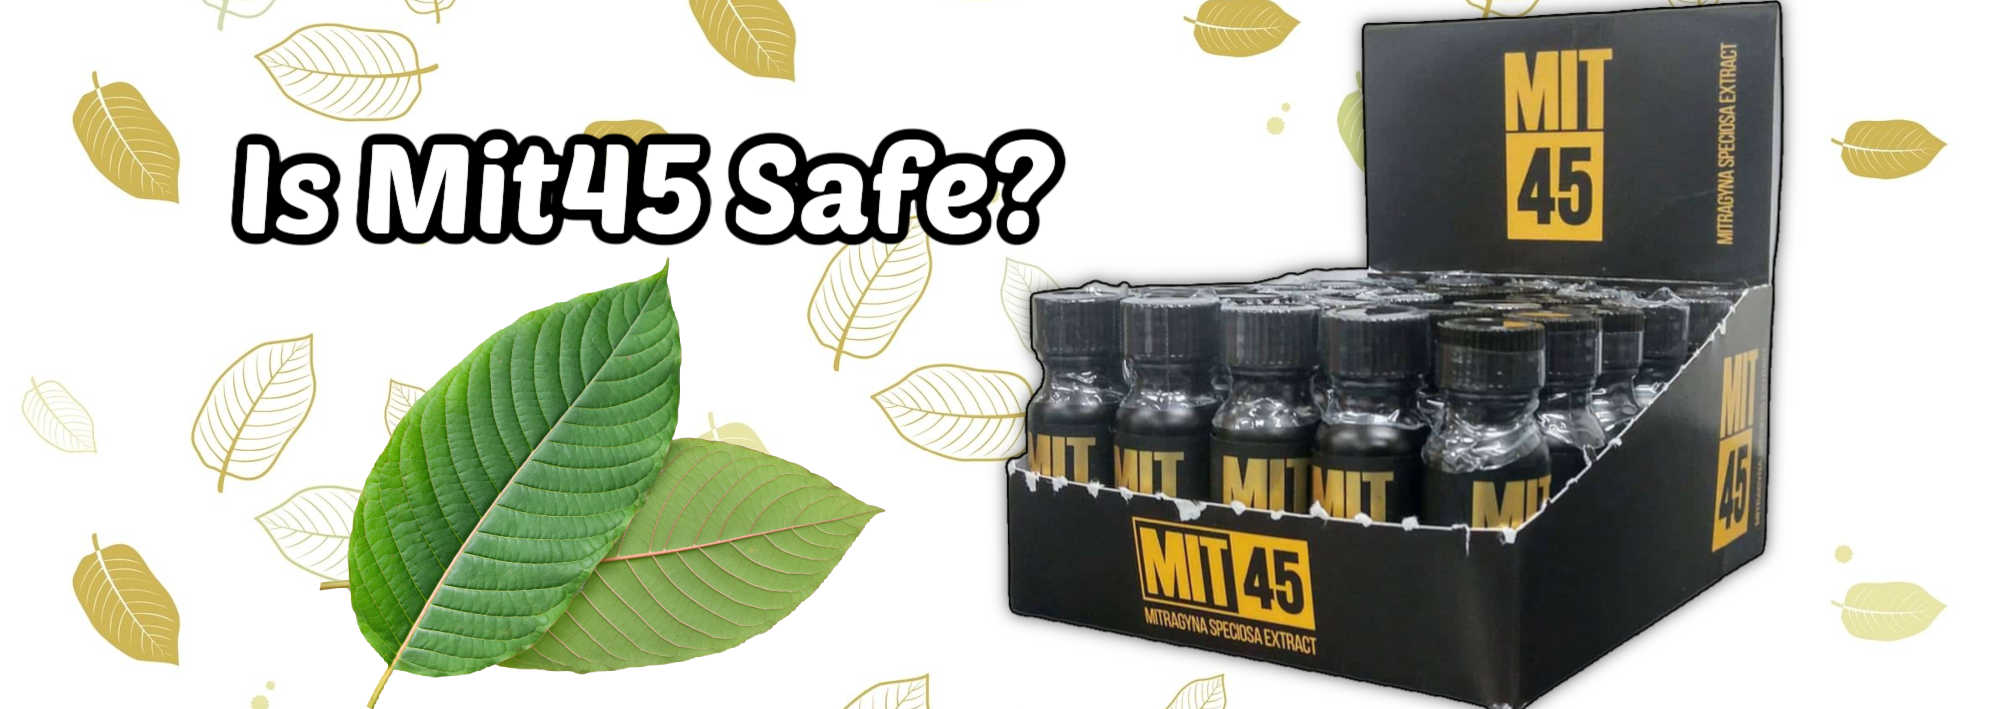 image of is mit 45 safe